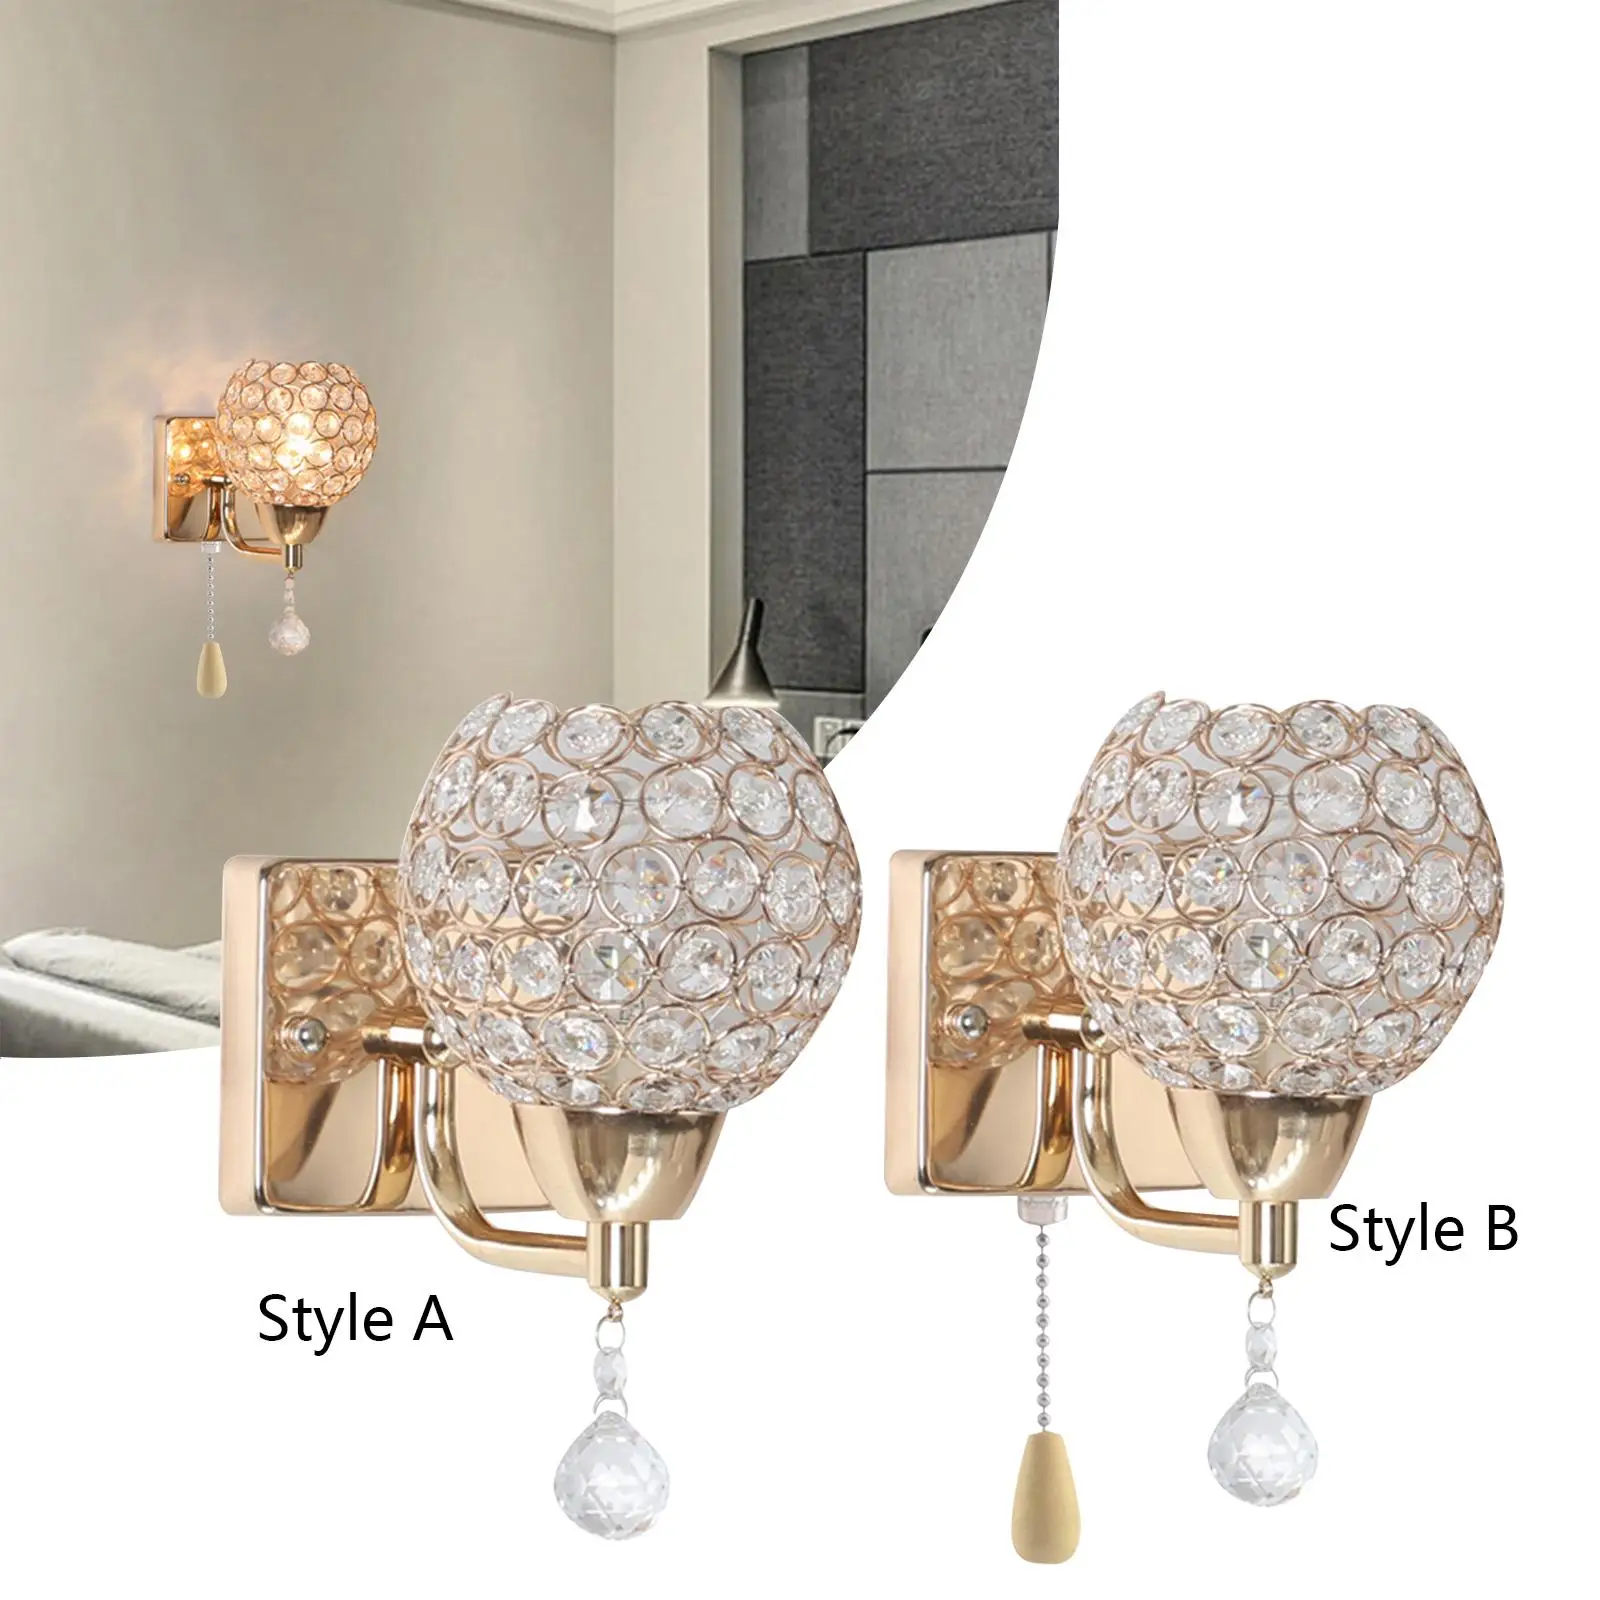 Elegant Wall Sconce Bedrooms Stairs Corridor Bedside Bathroom Wall Mounted Lamp Decorative